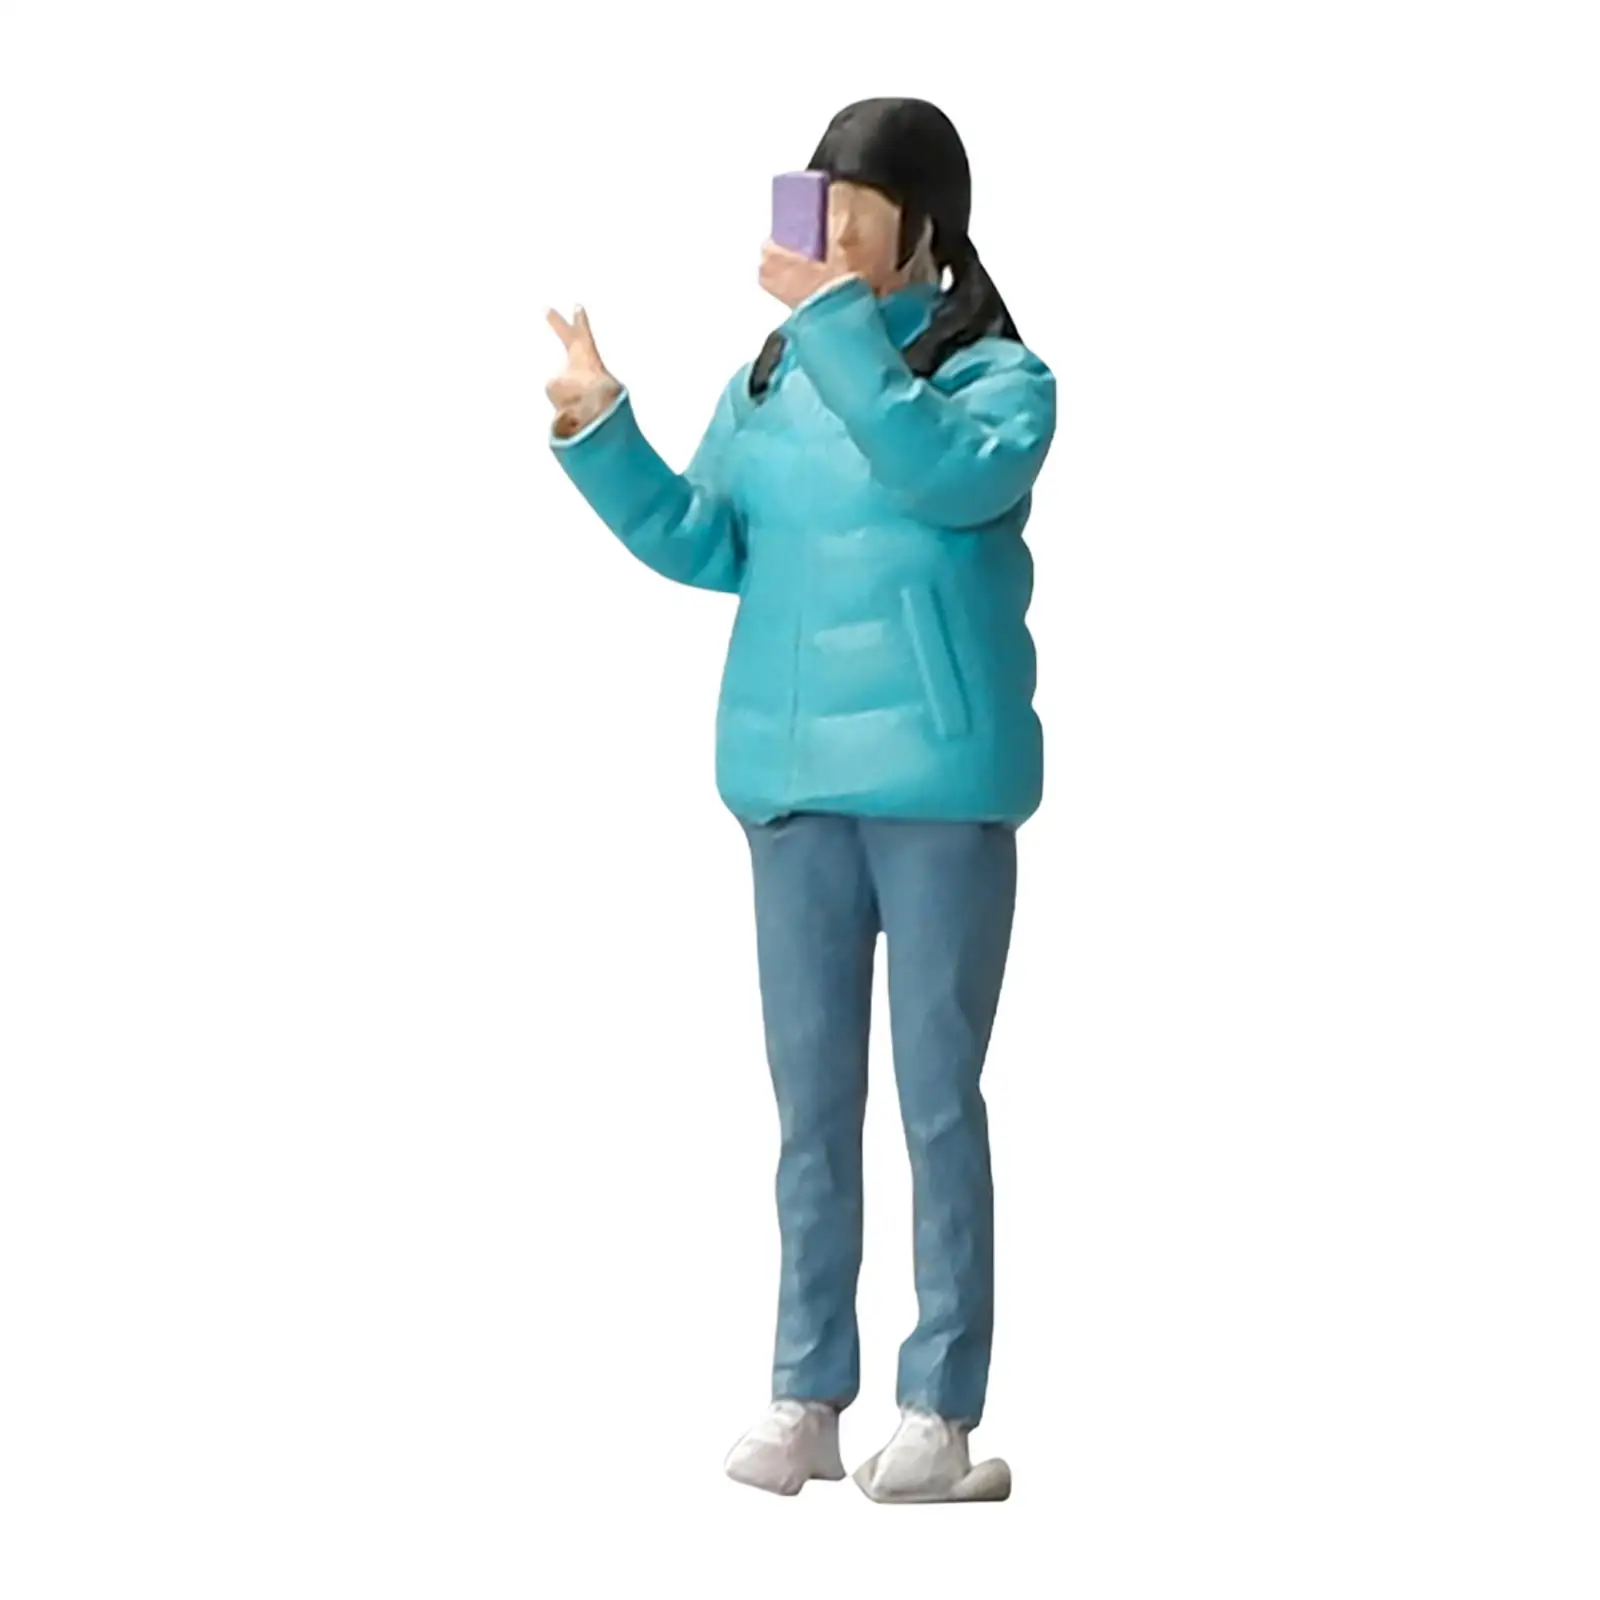 1:64 People Figures Down Jacket Girl Sand Table Ornament Miniature People Figurines Crafts for Scenery Landscape Dollhouse Decor